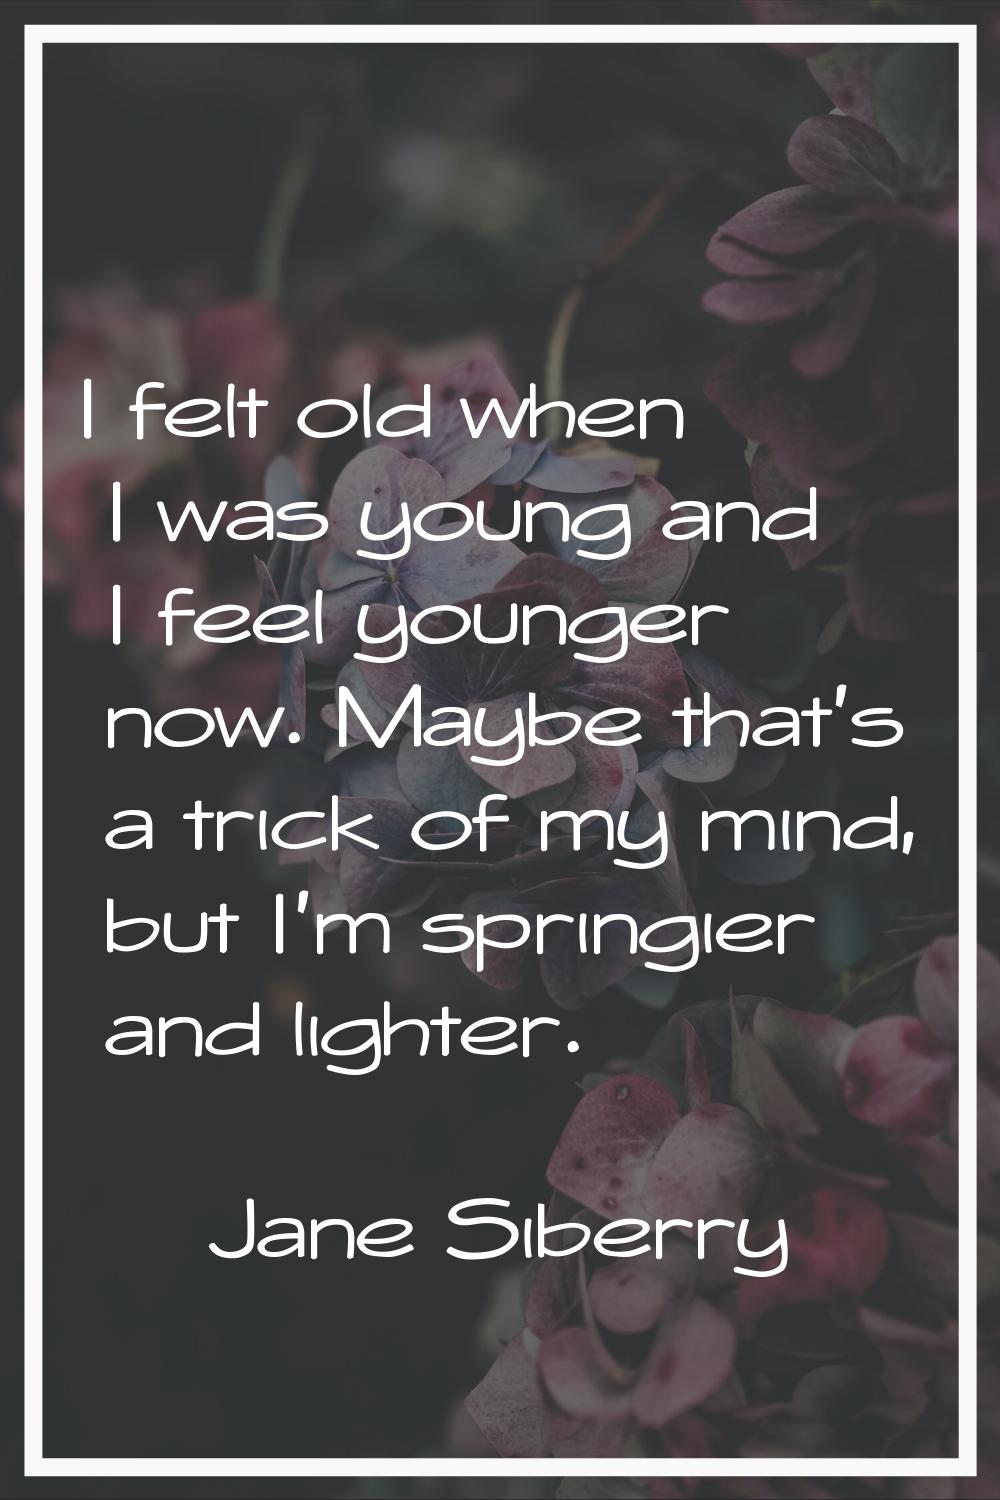 I felt old when I was young and I feel younger now. Maybe that's a trick of my mind, but I'm spring